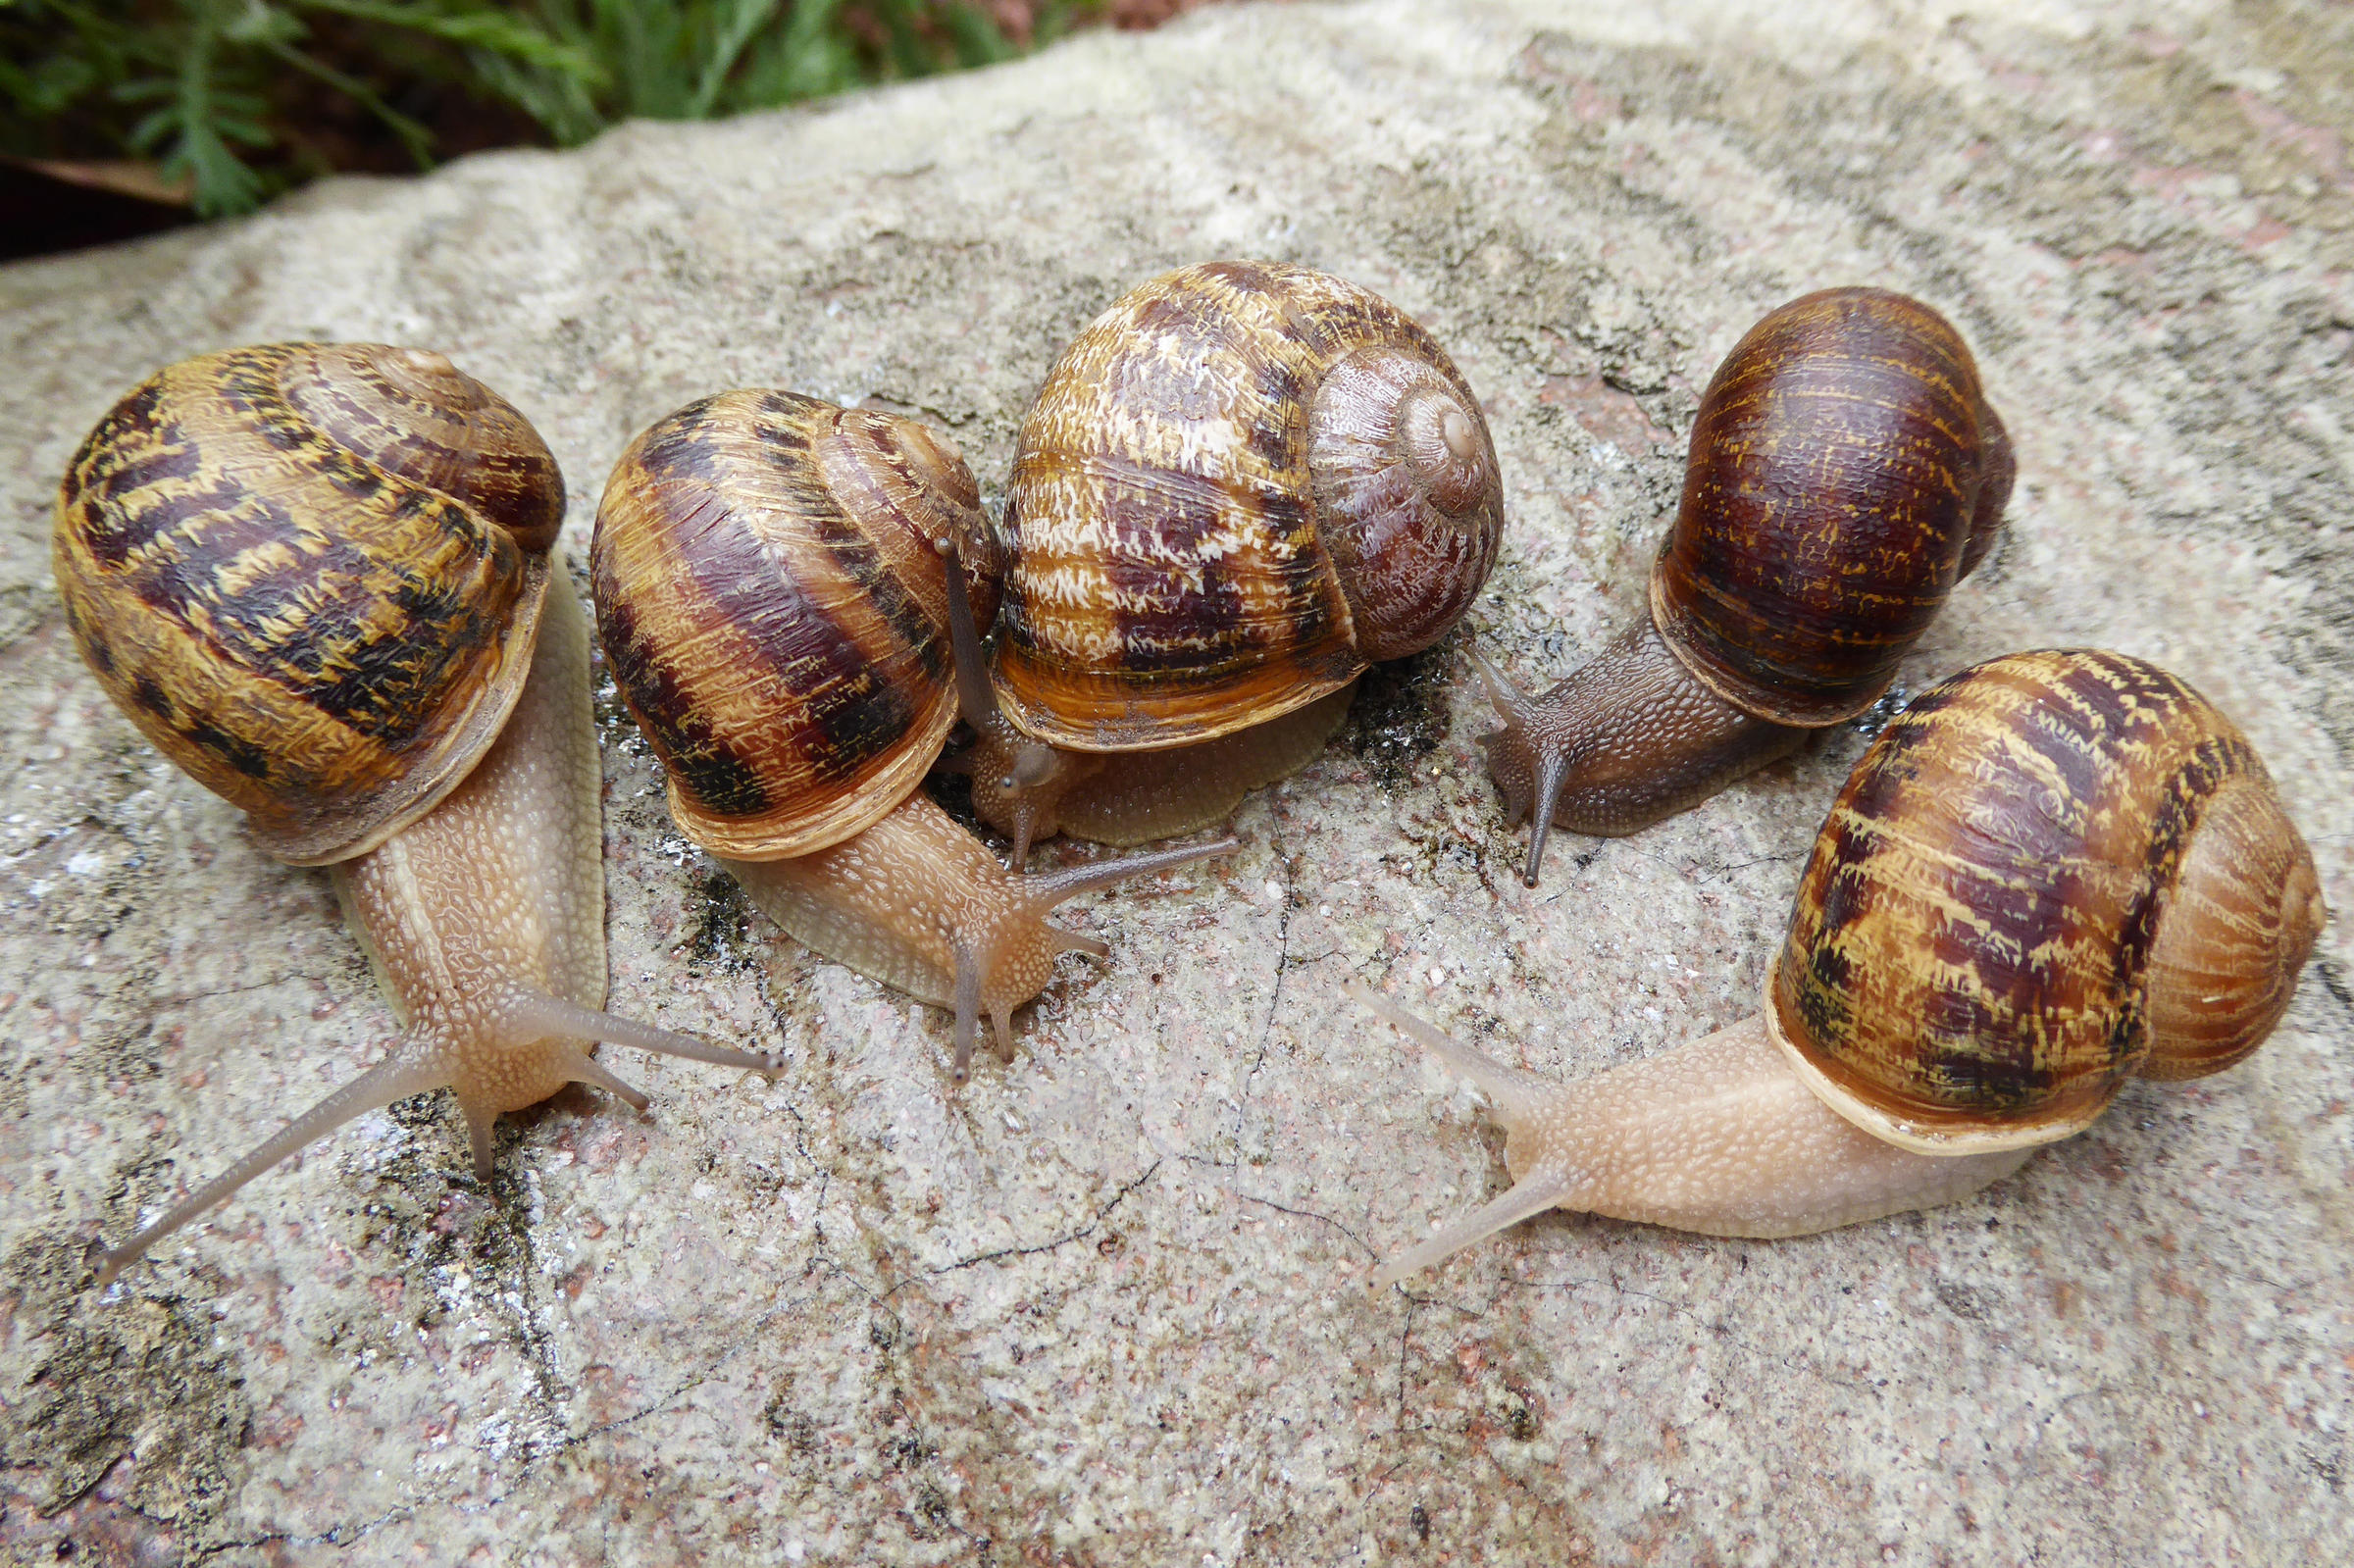 Jeremy, The Lonely, Left-Twisting Snail, Dies — But Knows Love ...